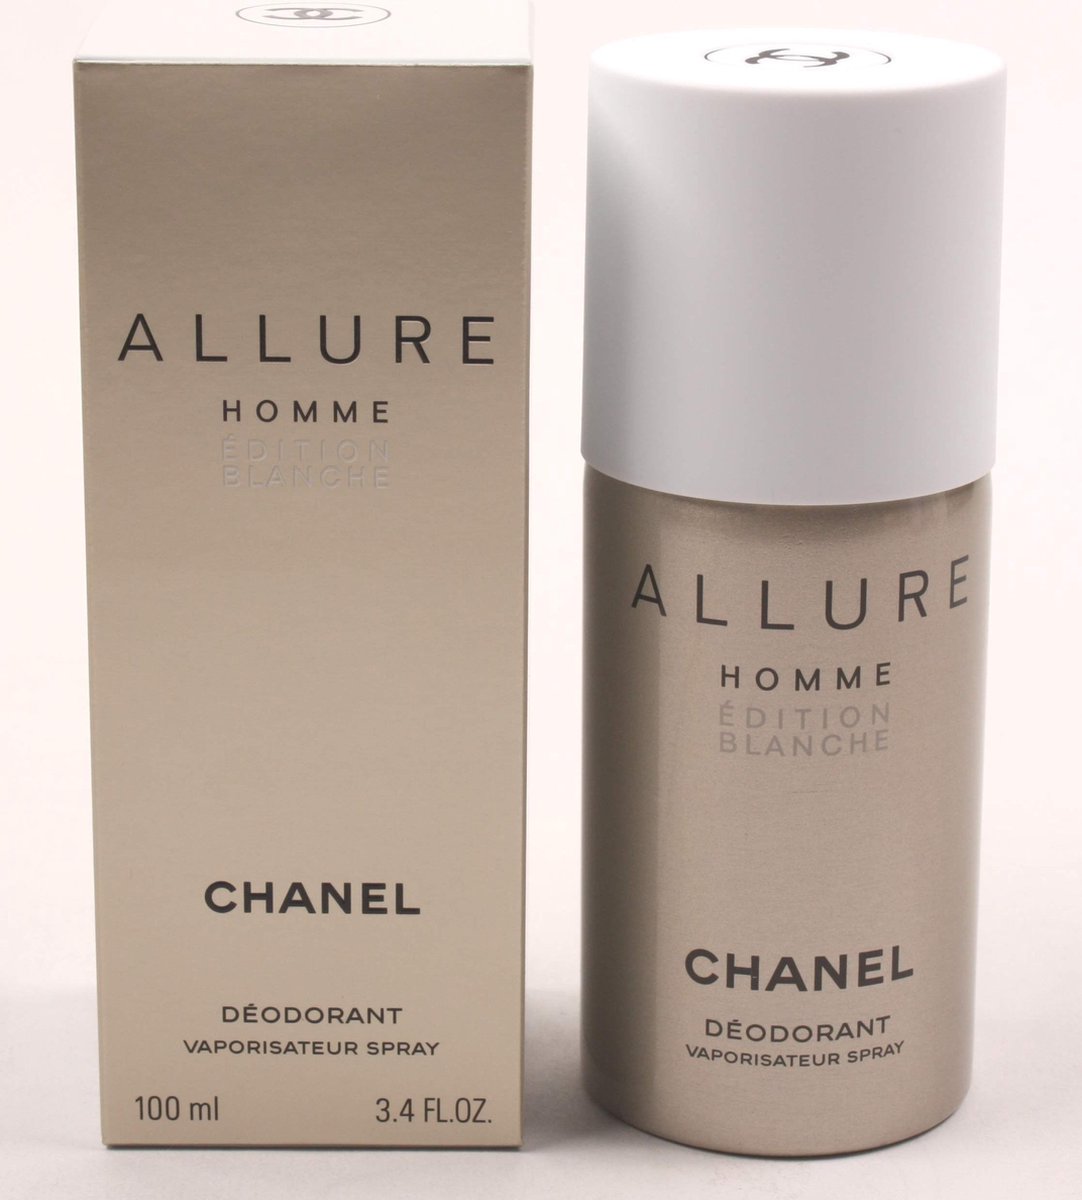 CHANEL Allure Homme Édition Blanche 100ml Deodorant